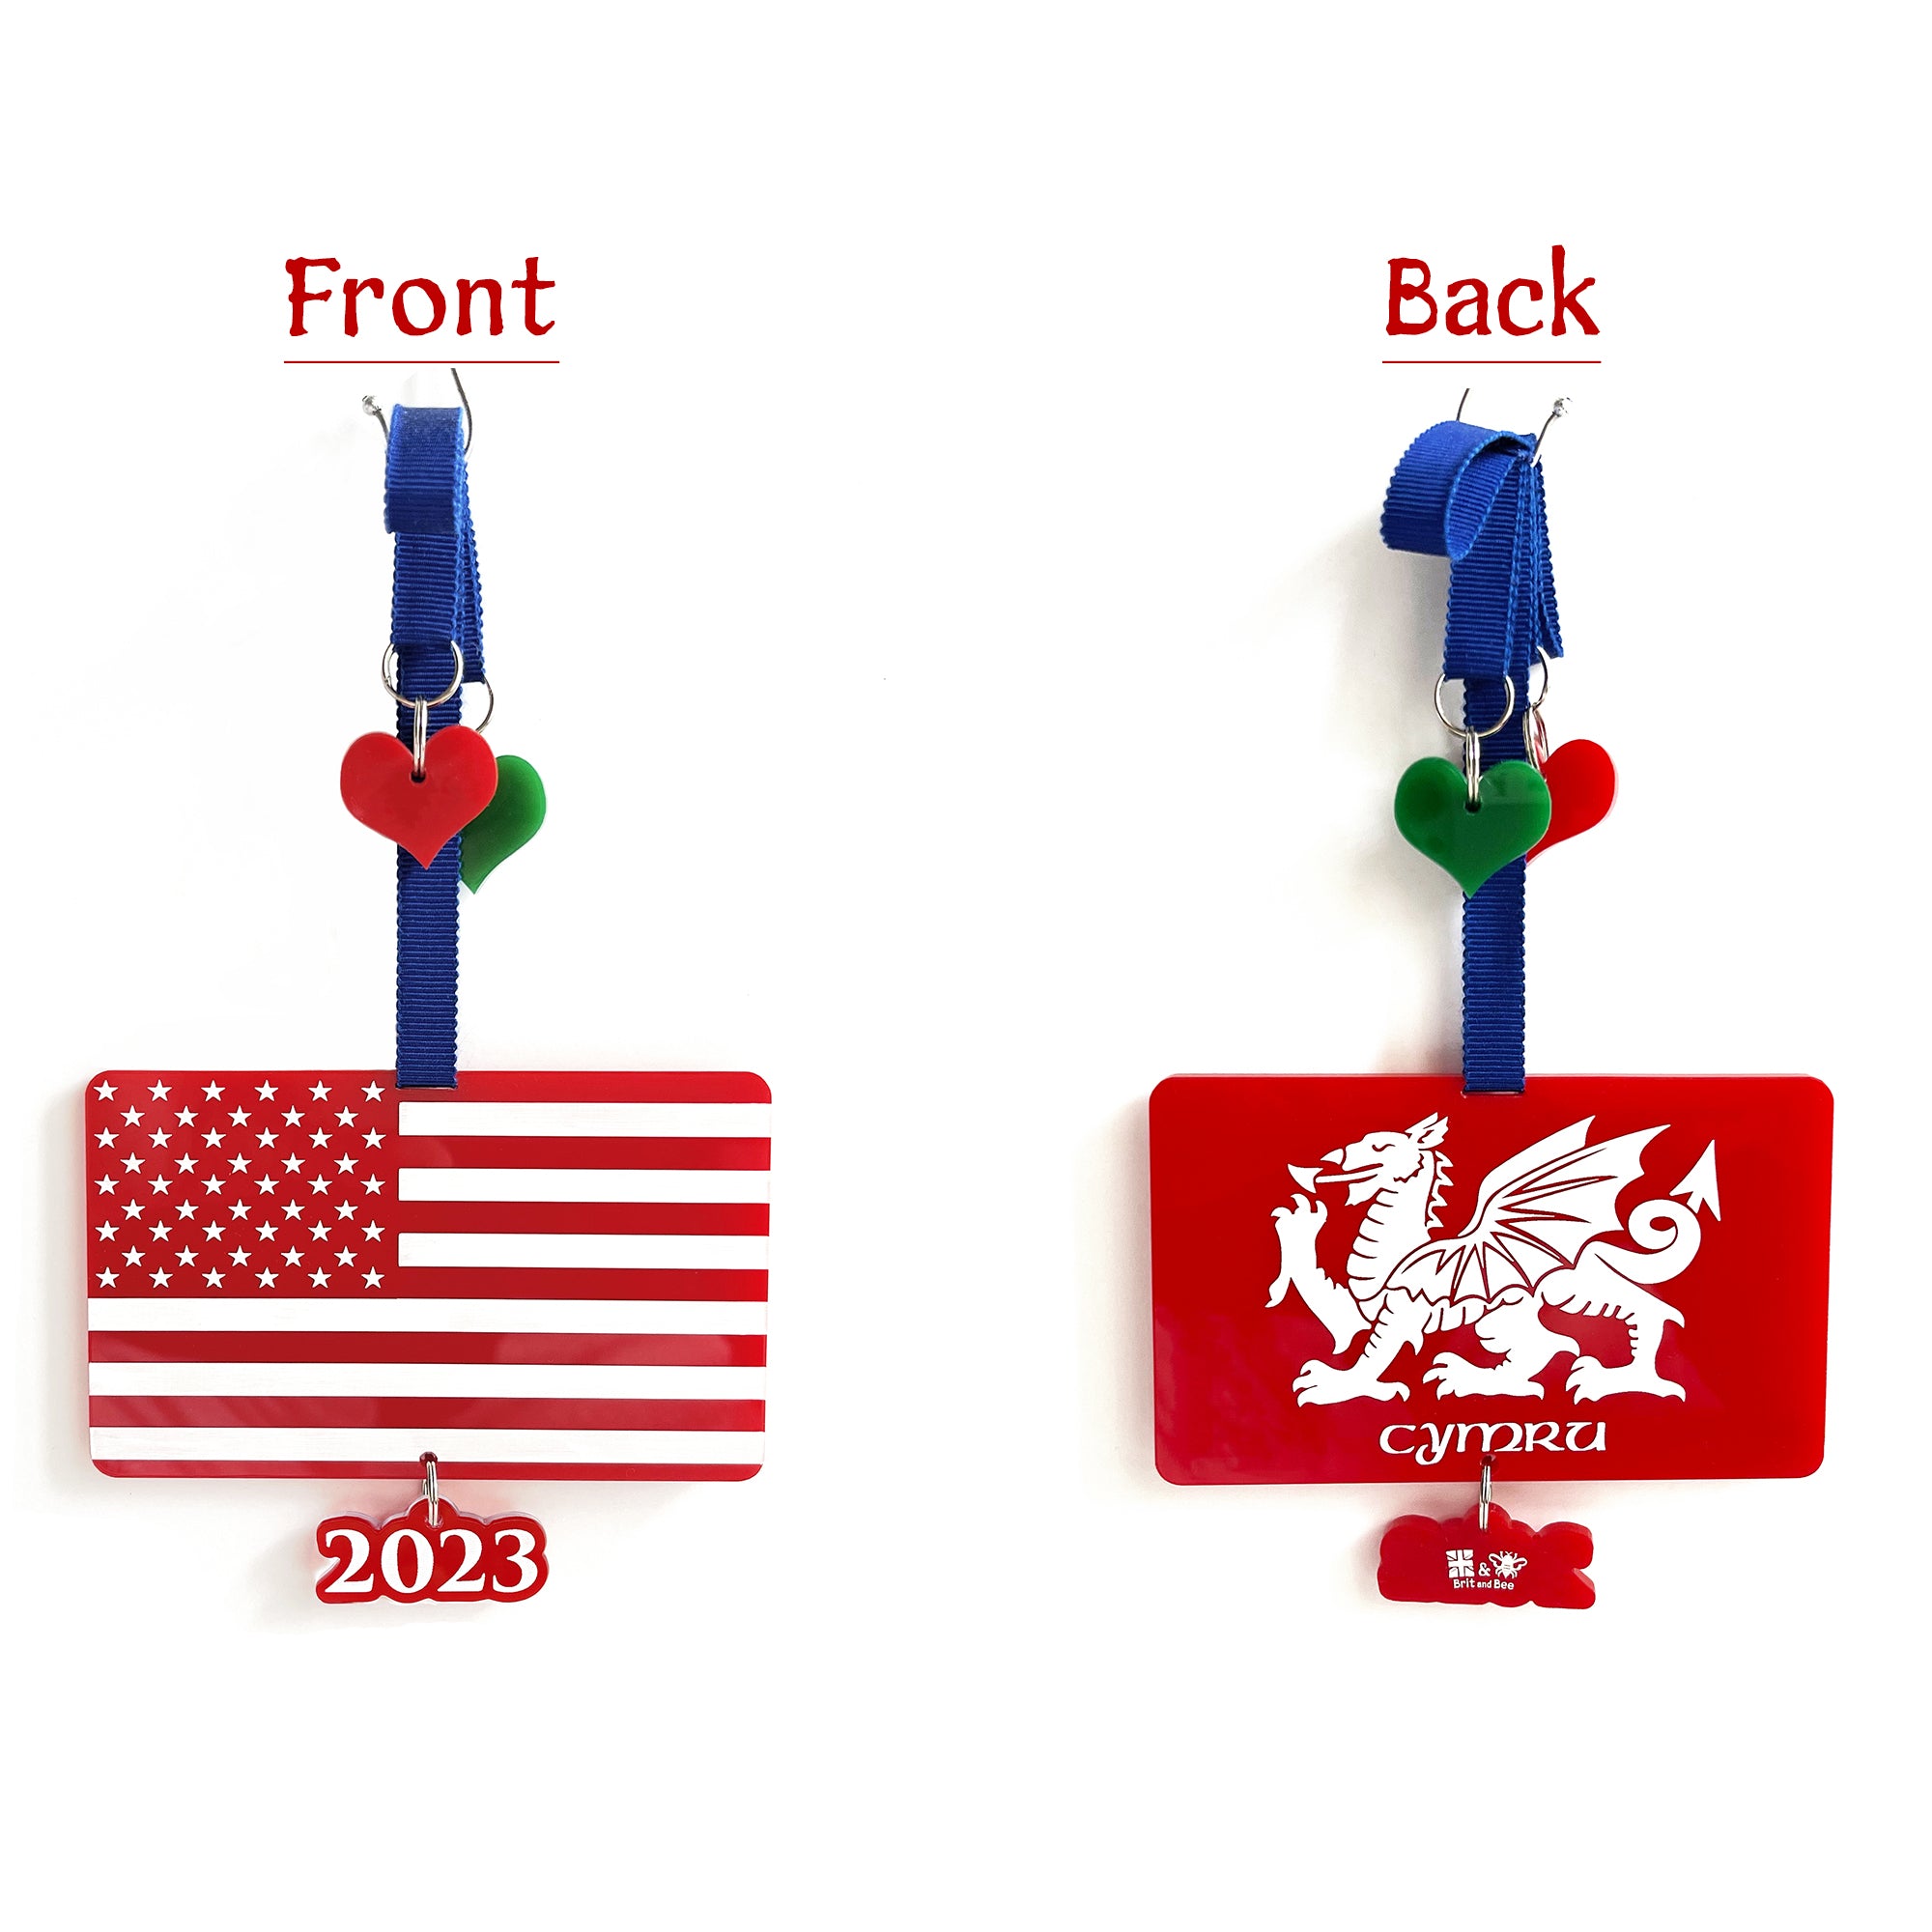 USA and Wales Flag Ornament